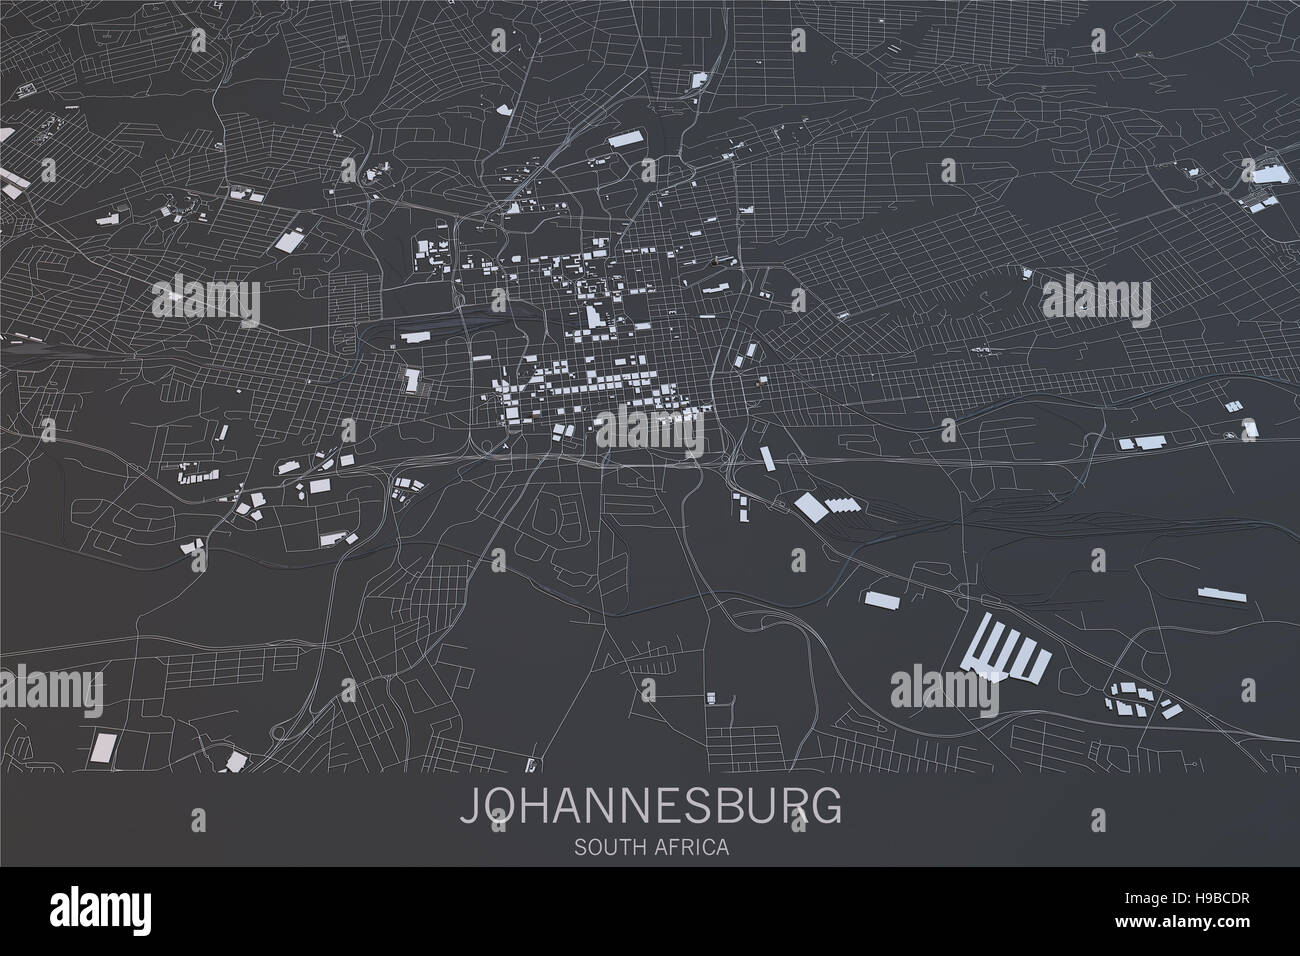 Johannesburg map, satellite view, city, South Africa Stock Photo